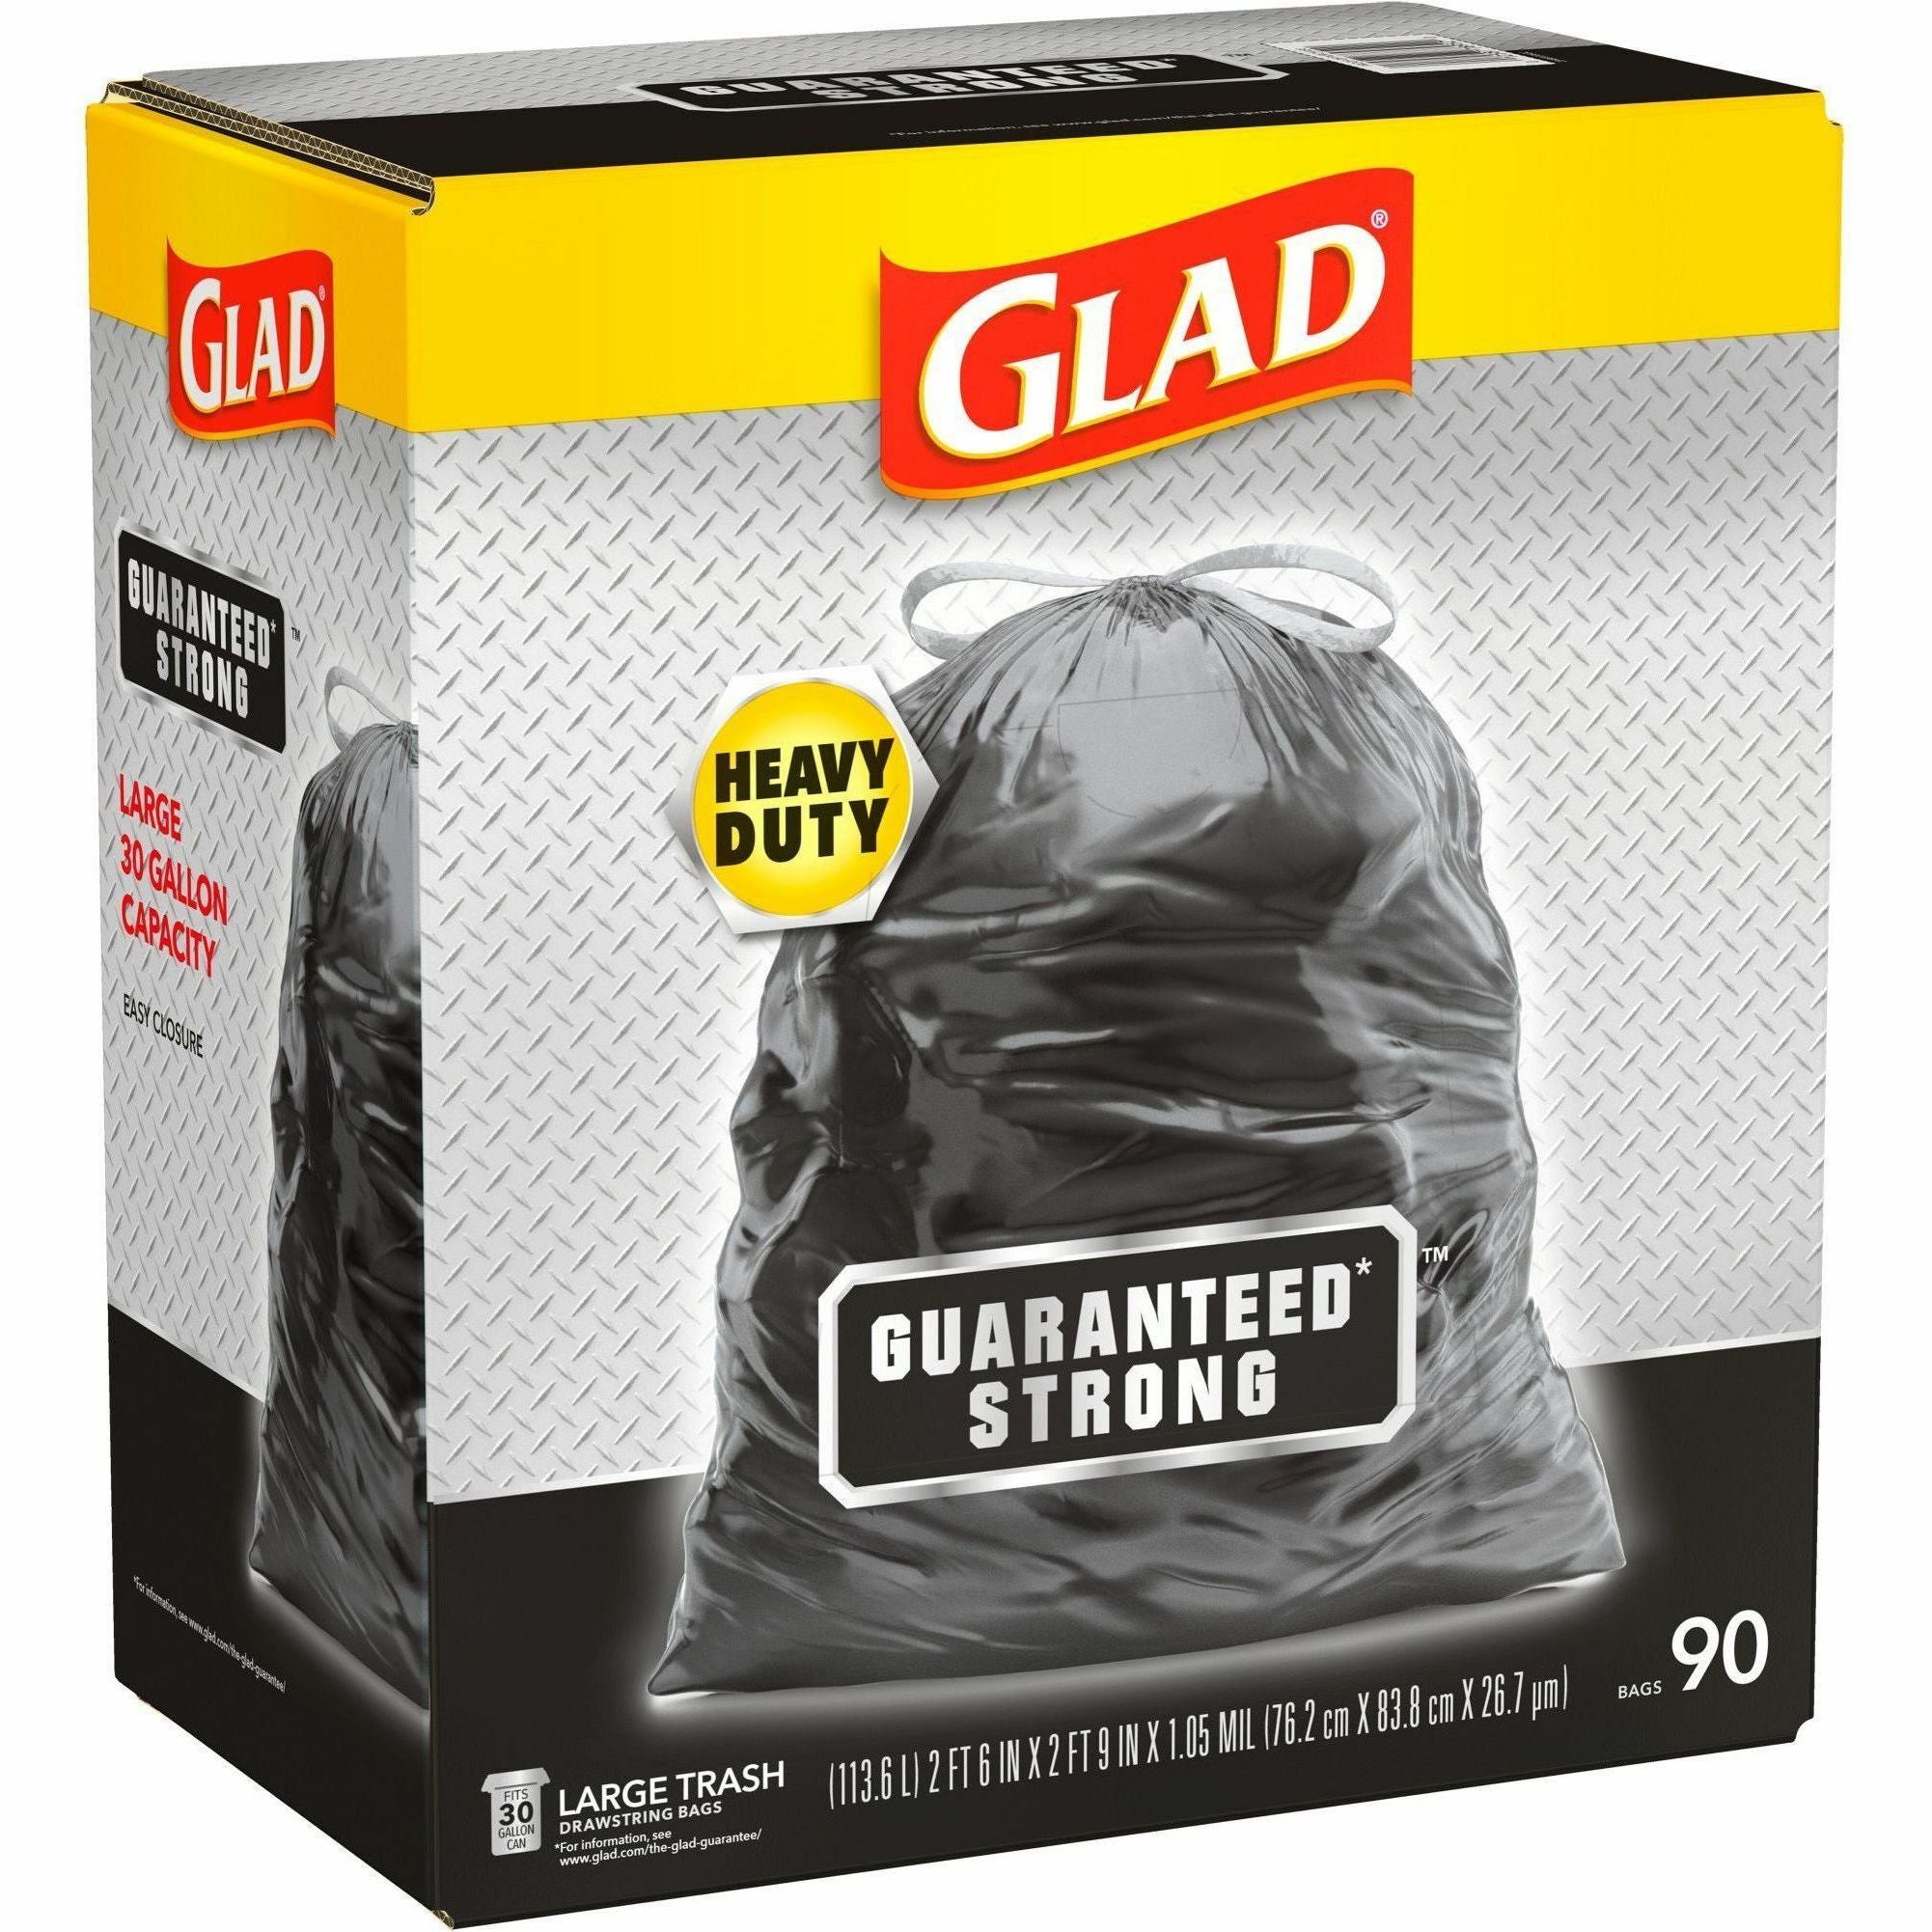 Glad Large Drawstring Trash Bags - Large Size - 30 gal Capacity - 30" Width x 32.99" Length - 1.05 mil (27 Micron) Thickness - Drawstring Closure - Black - Plastic - 68/Pallet - 90 Per Box - Garbage, Indoor, Outdoor - 5